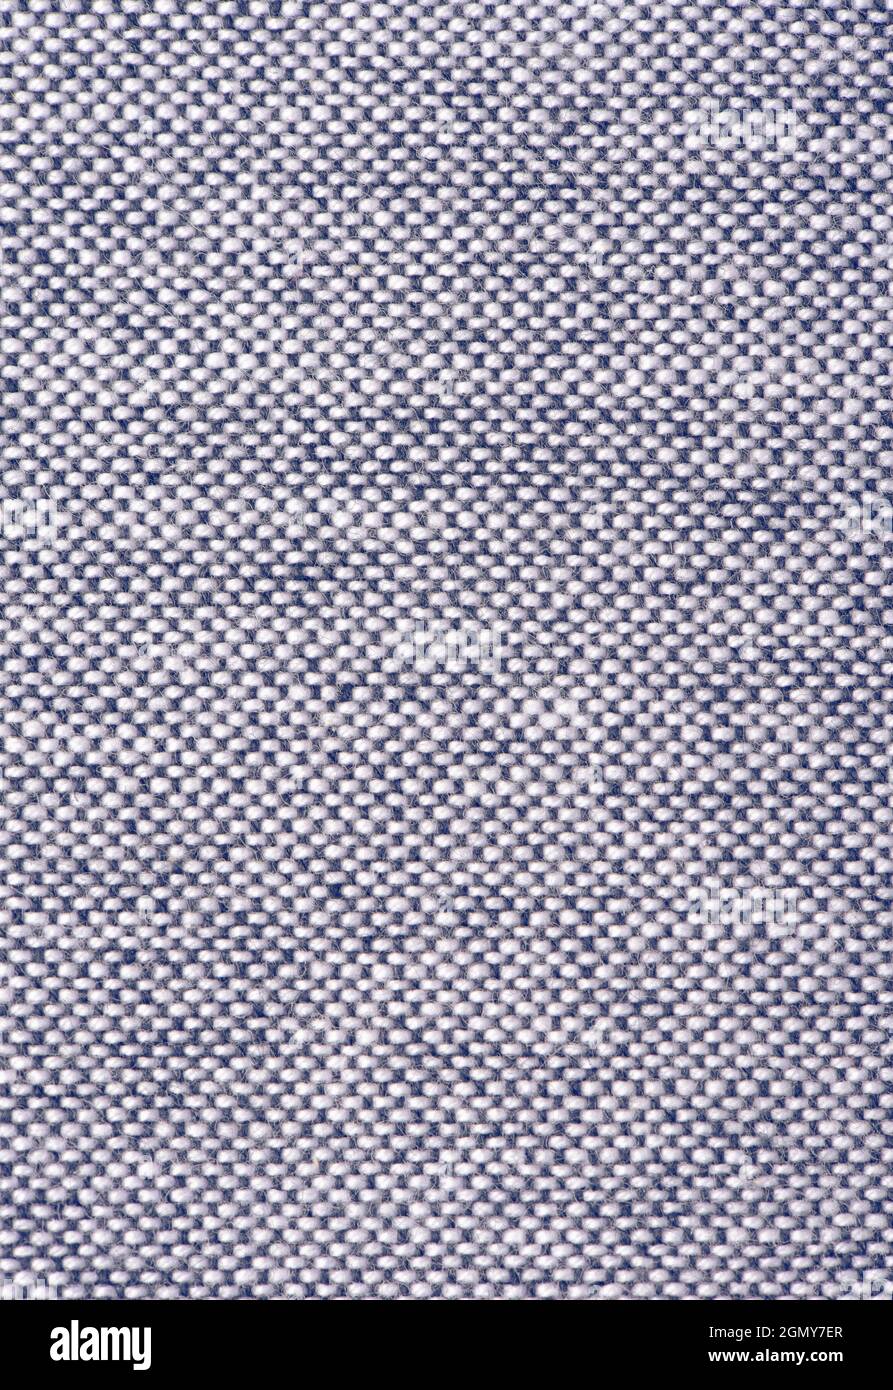 Front view of cotton white and blue fabric texture Stock Photo